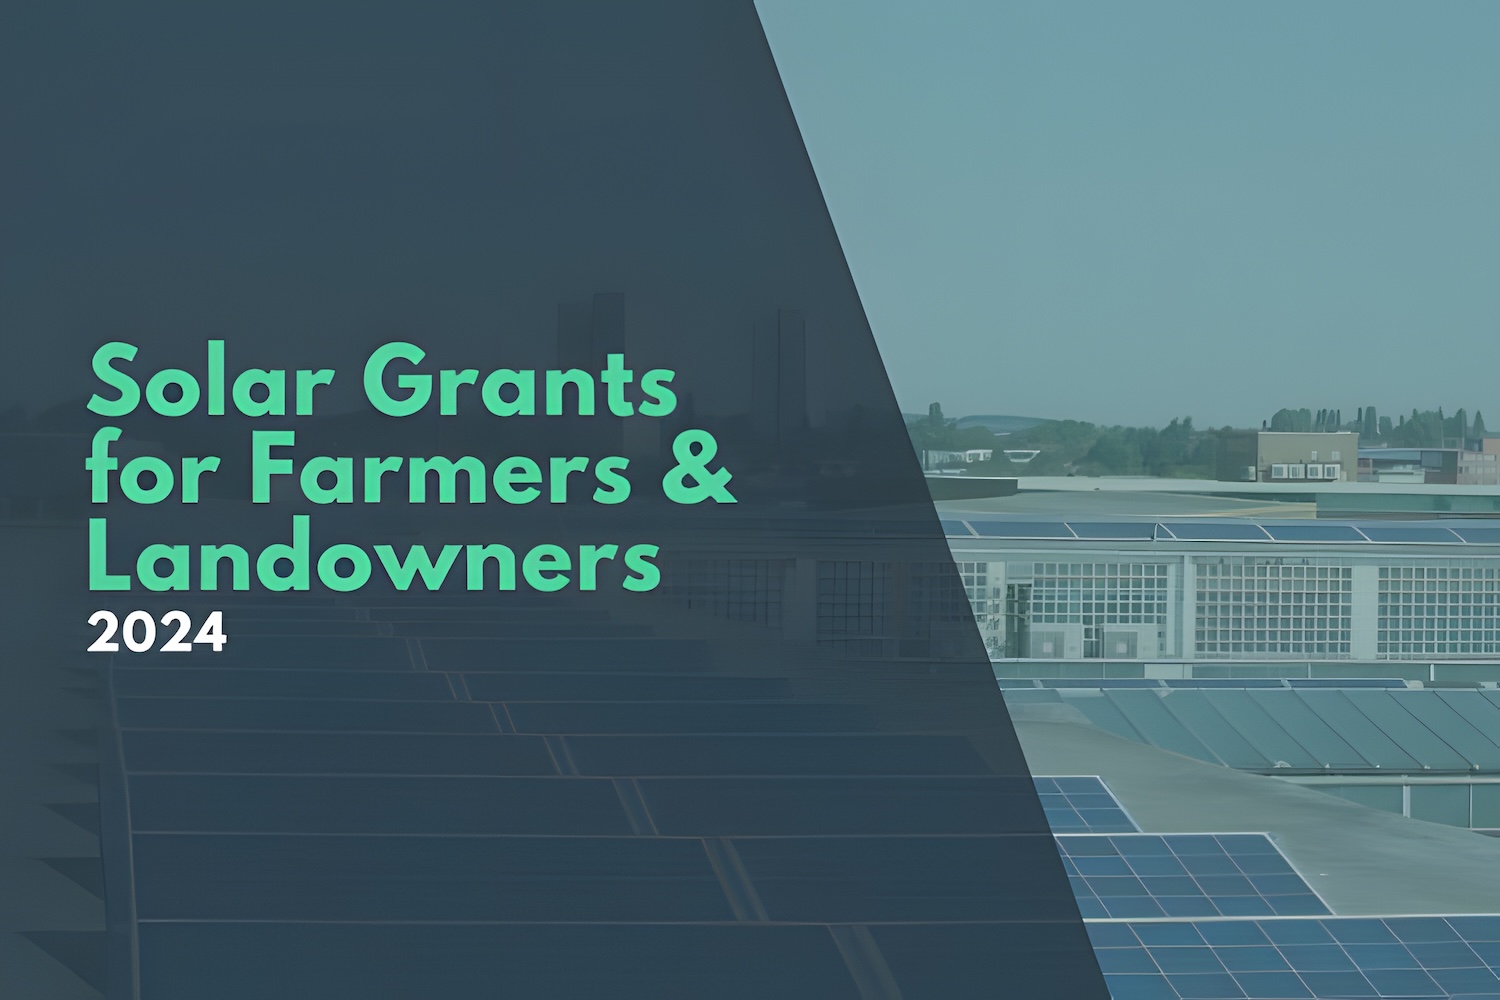 Solar grants for farmers and landowners